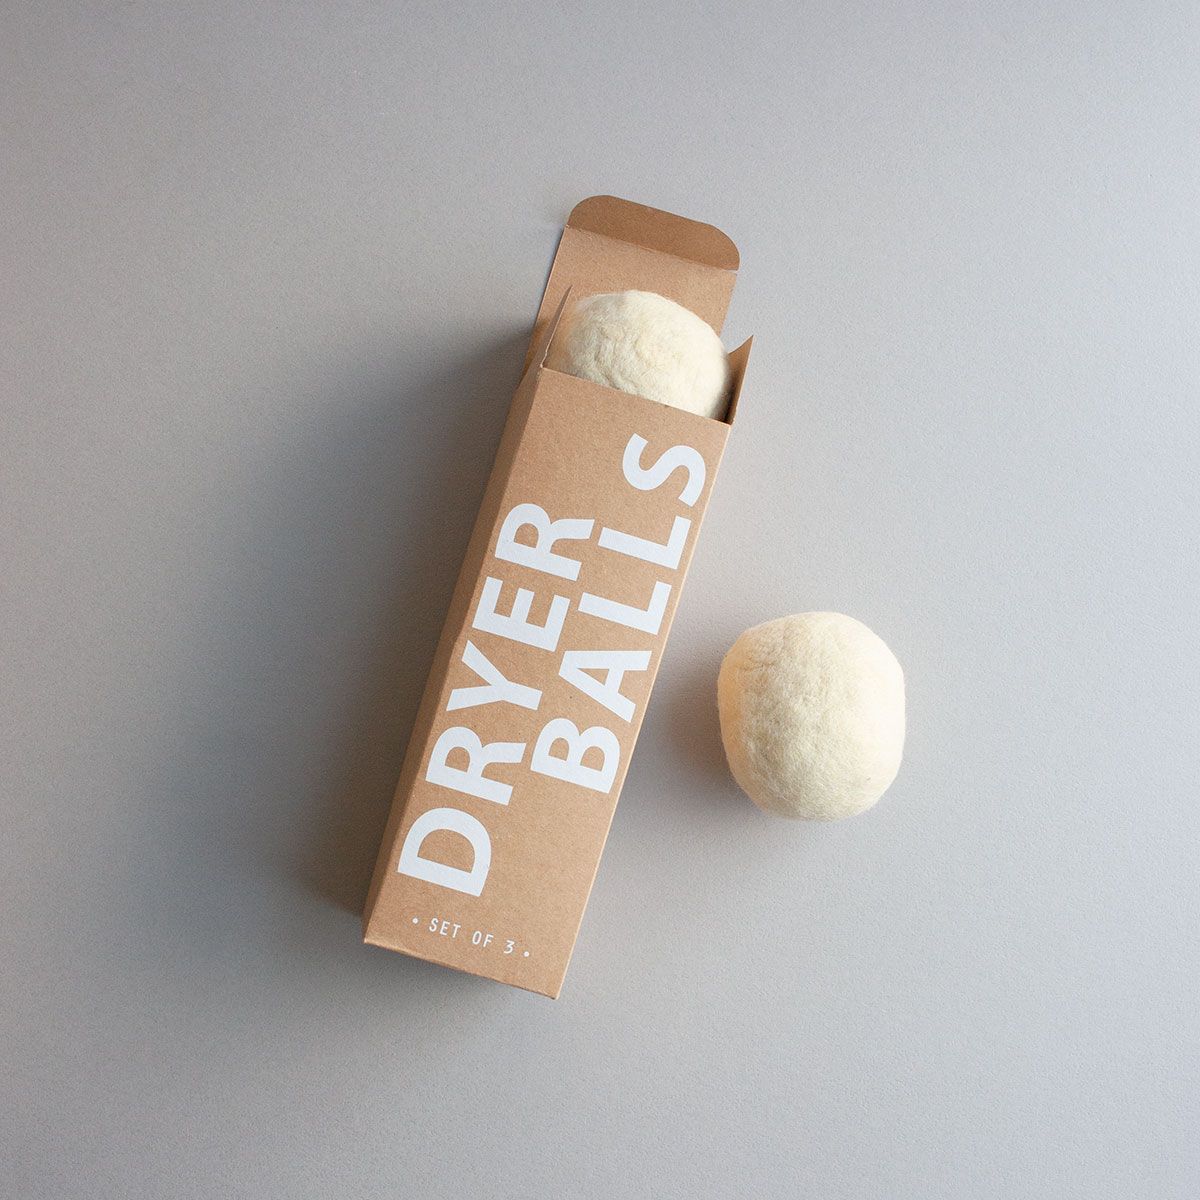 Kraft board box reads in white all-caps: Dryer Balls | Set of 3 laying on a gray background. One white felted wool ball lays outside of the box and another is peaking out of the box.